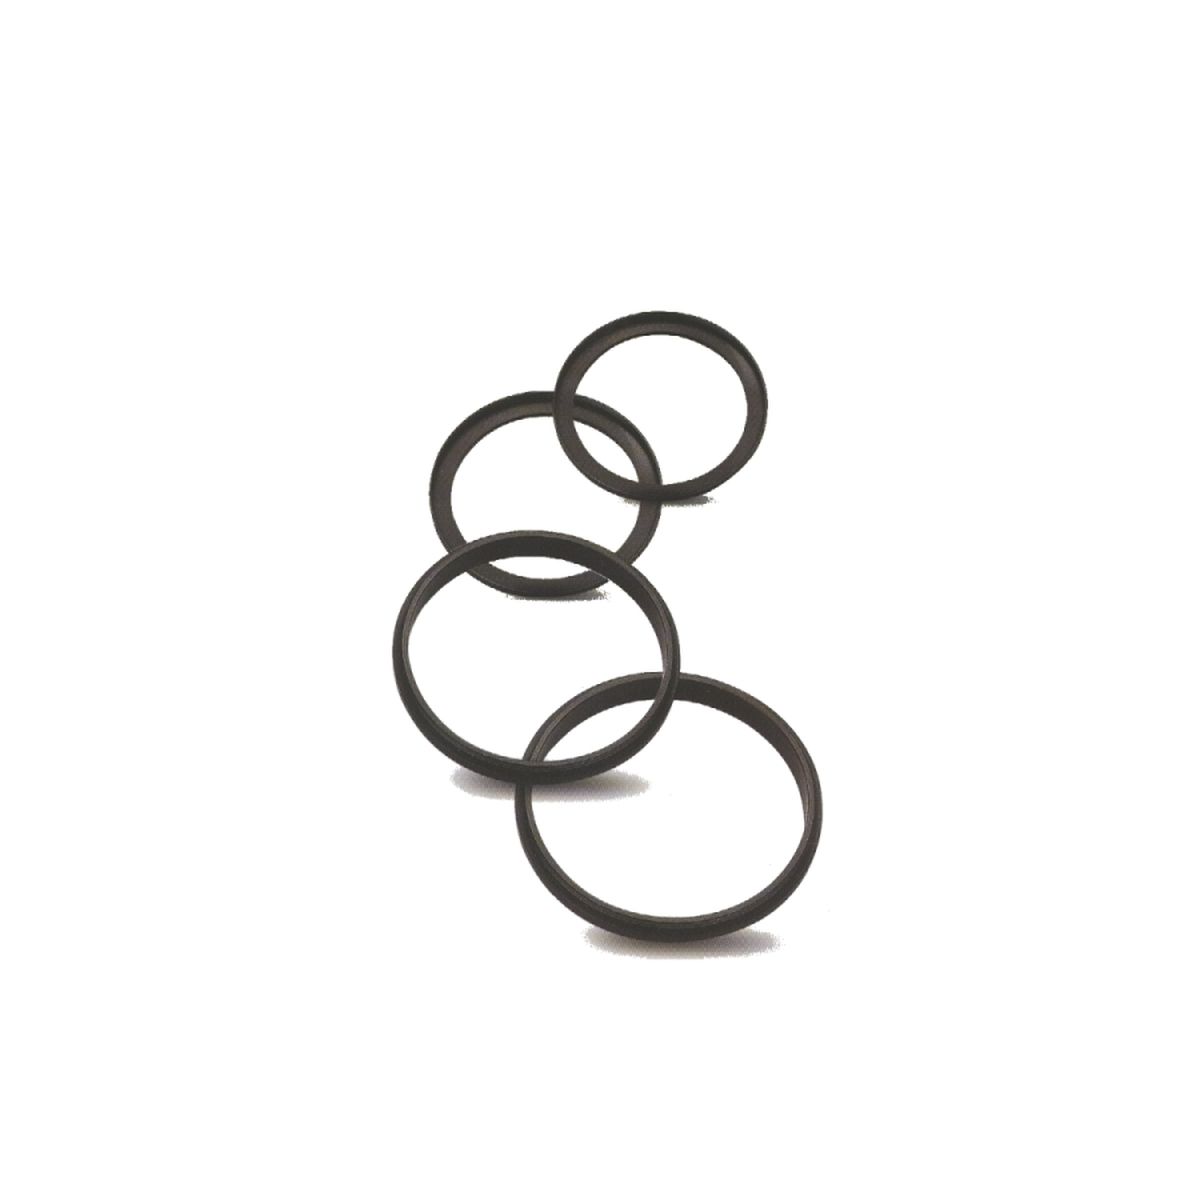 Caruba Step-up/down Ring 67mm - 86mm